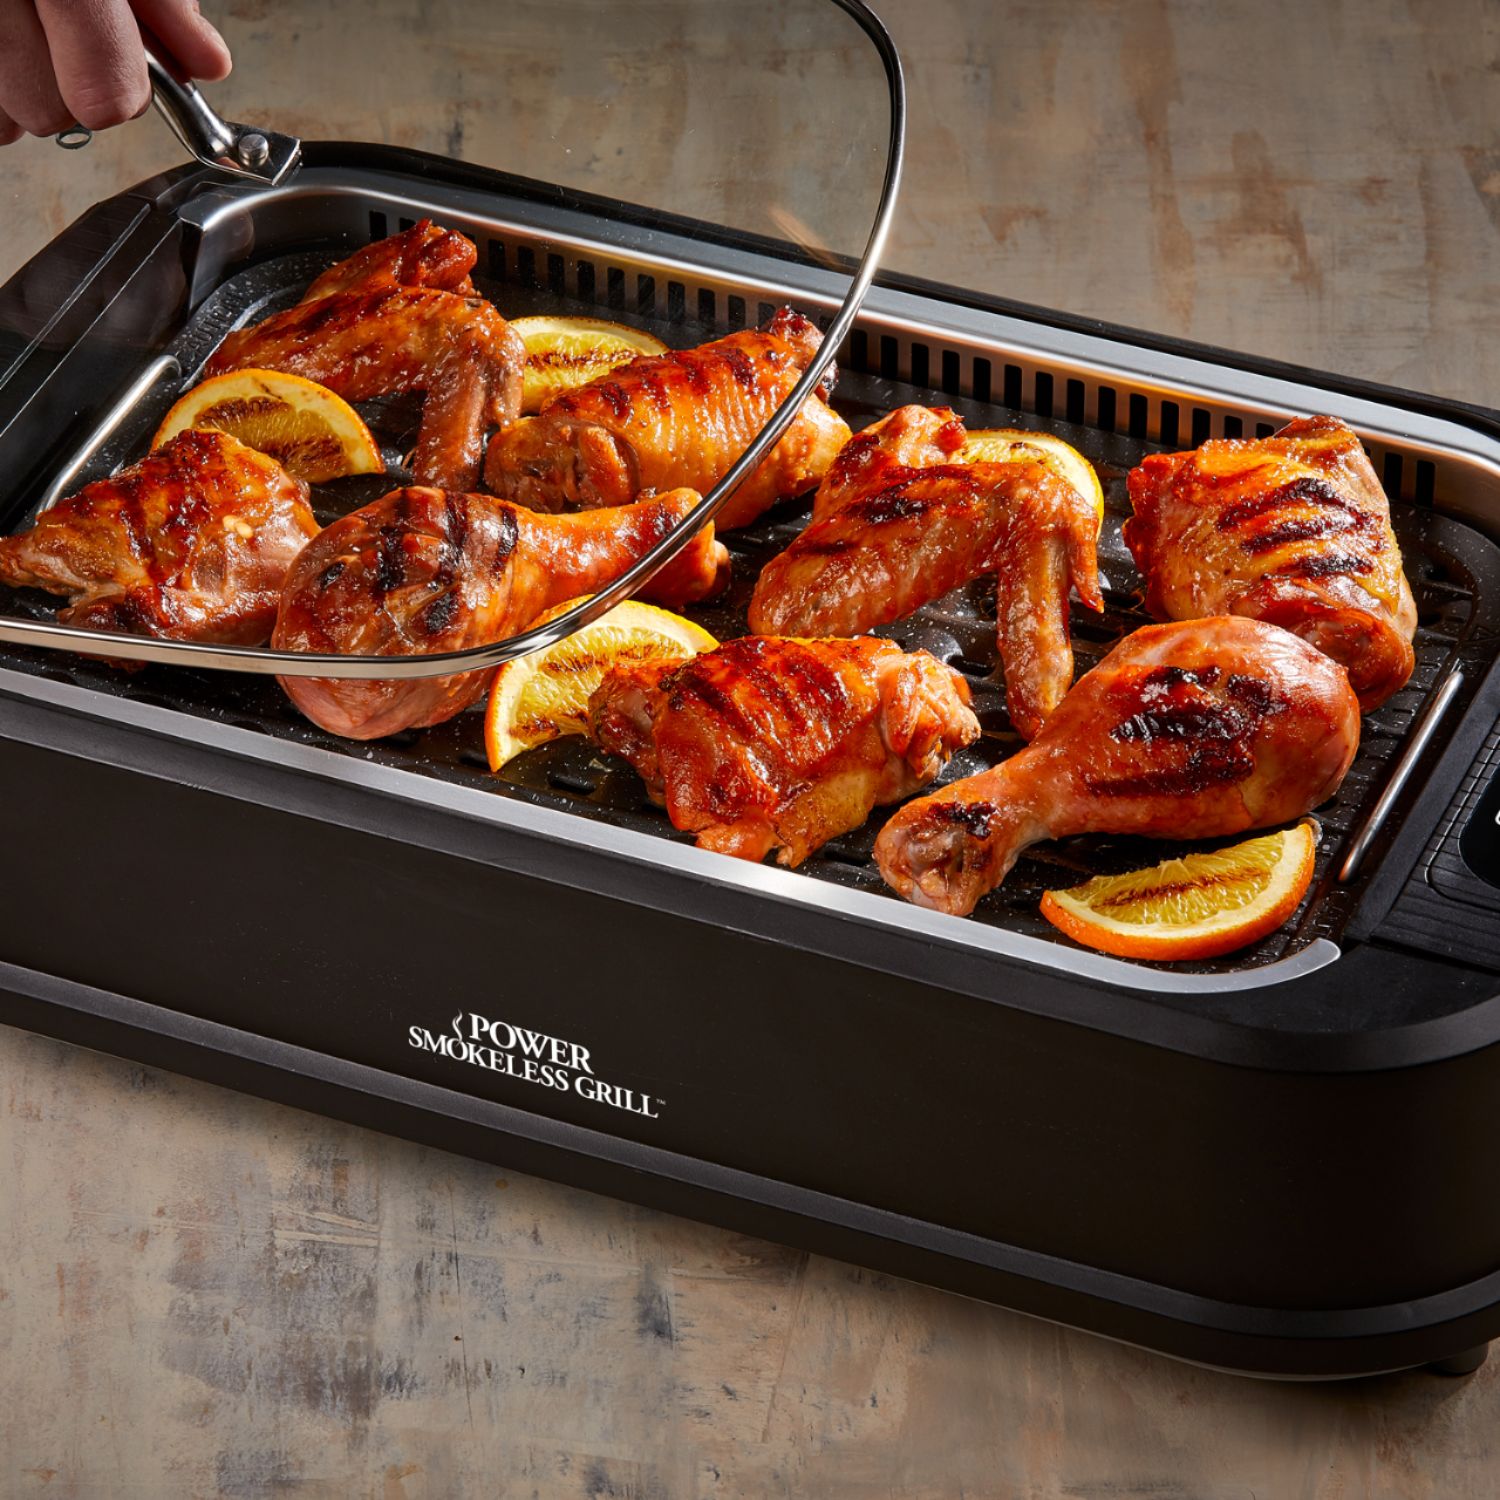 PowerXL Smokeless Grill PSG, Color: Black - JCPenney